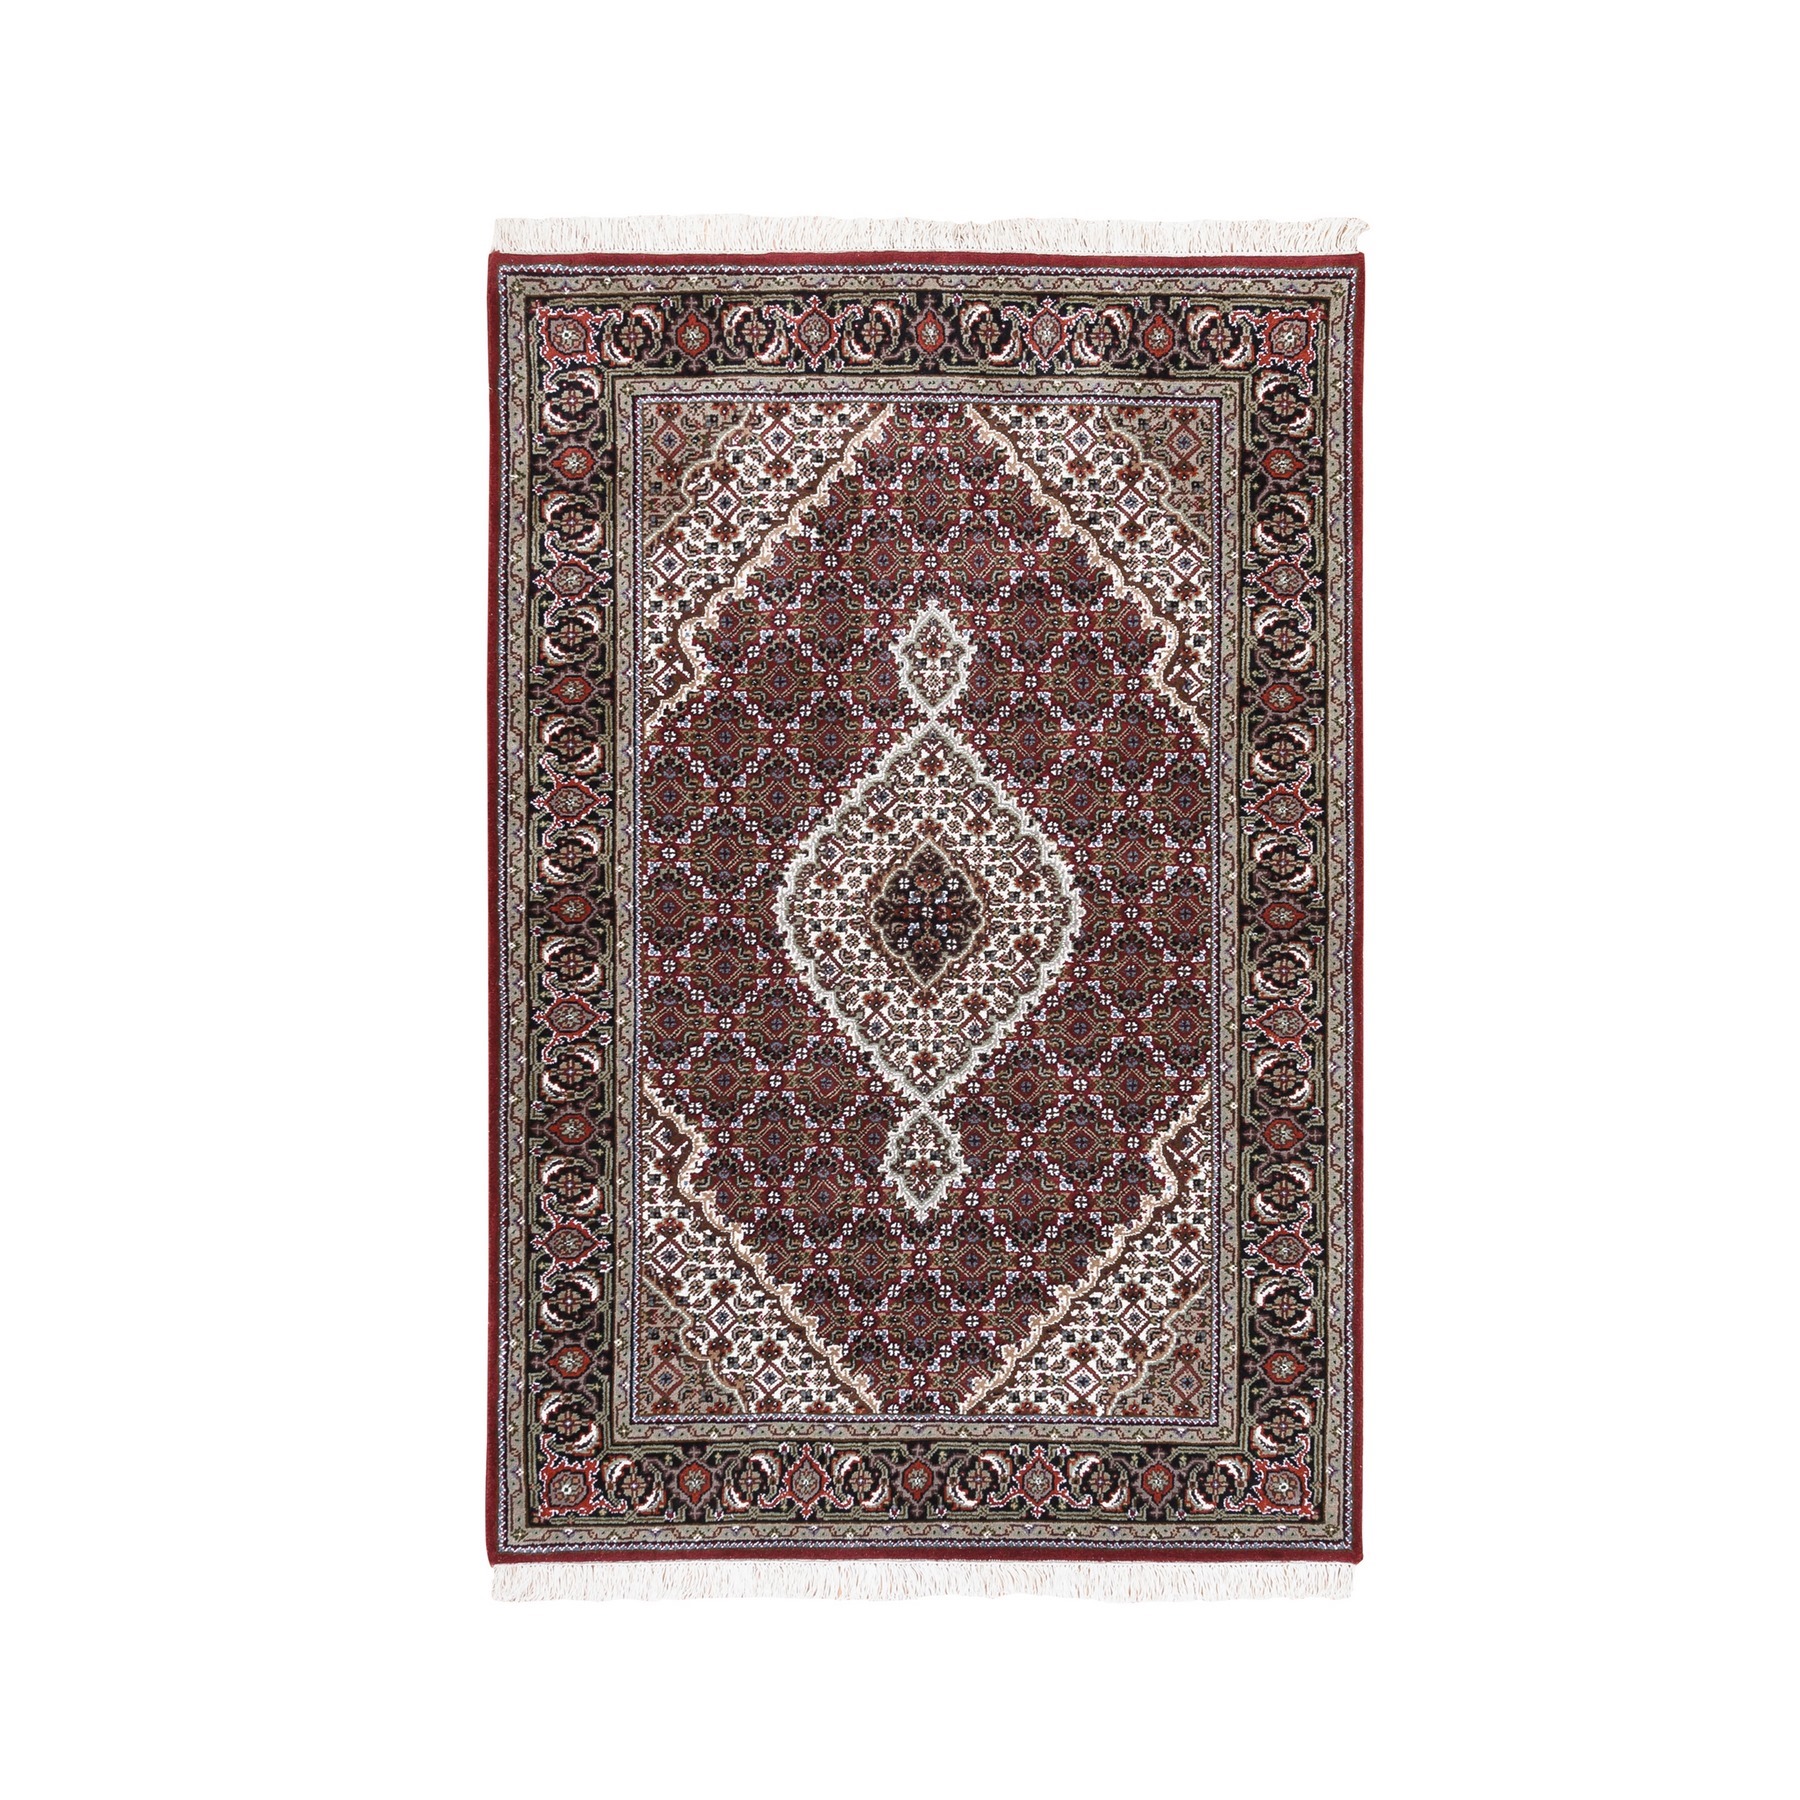 Pirniakan Collection Hand Knotted Red Rug No: 1125108